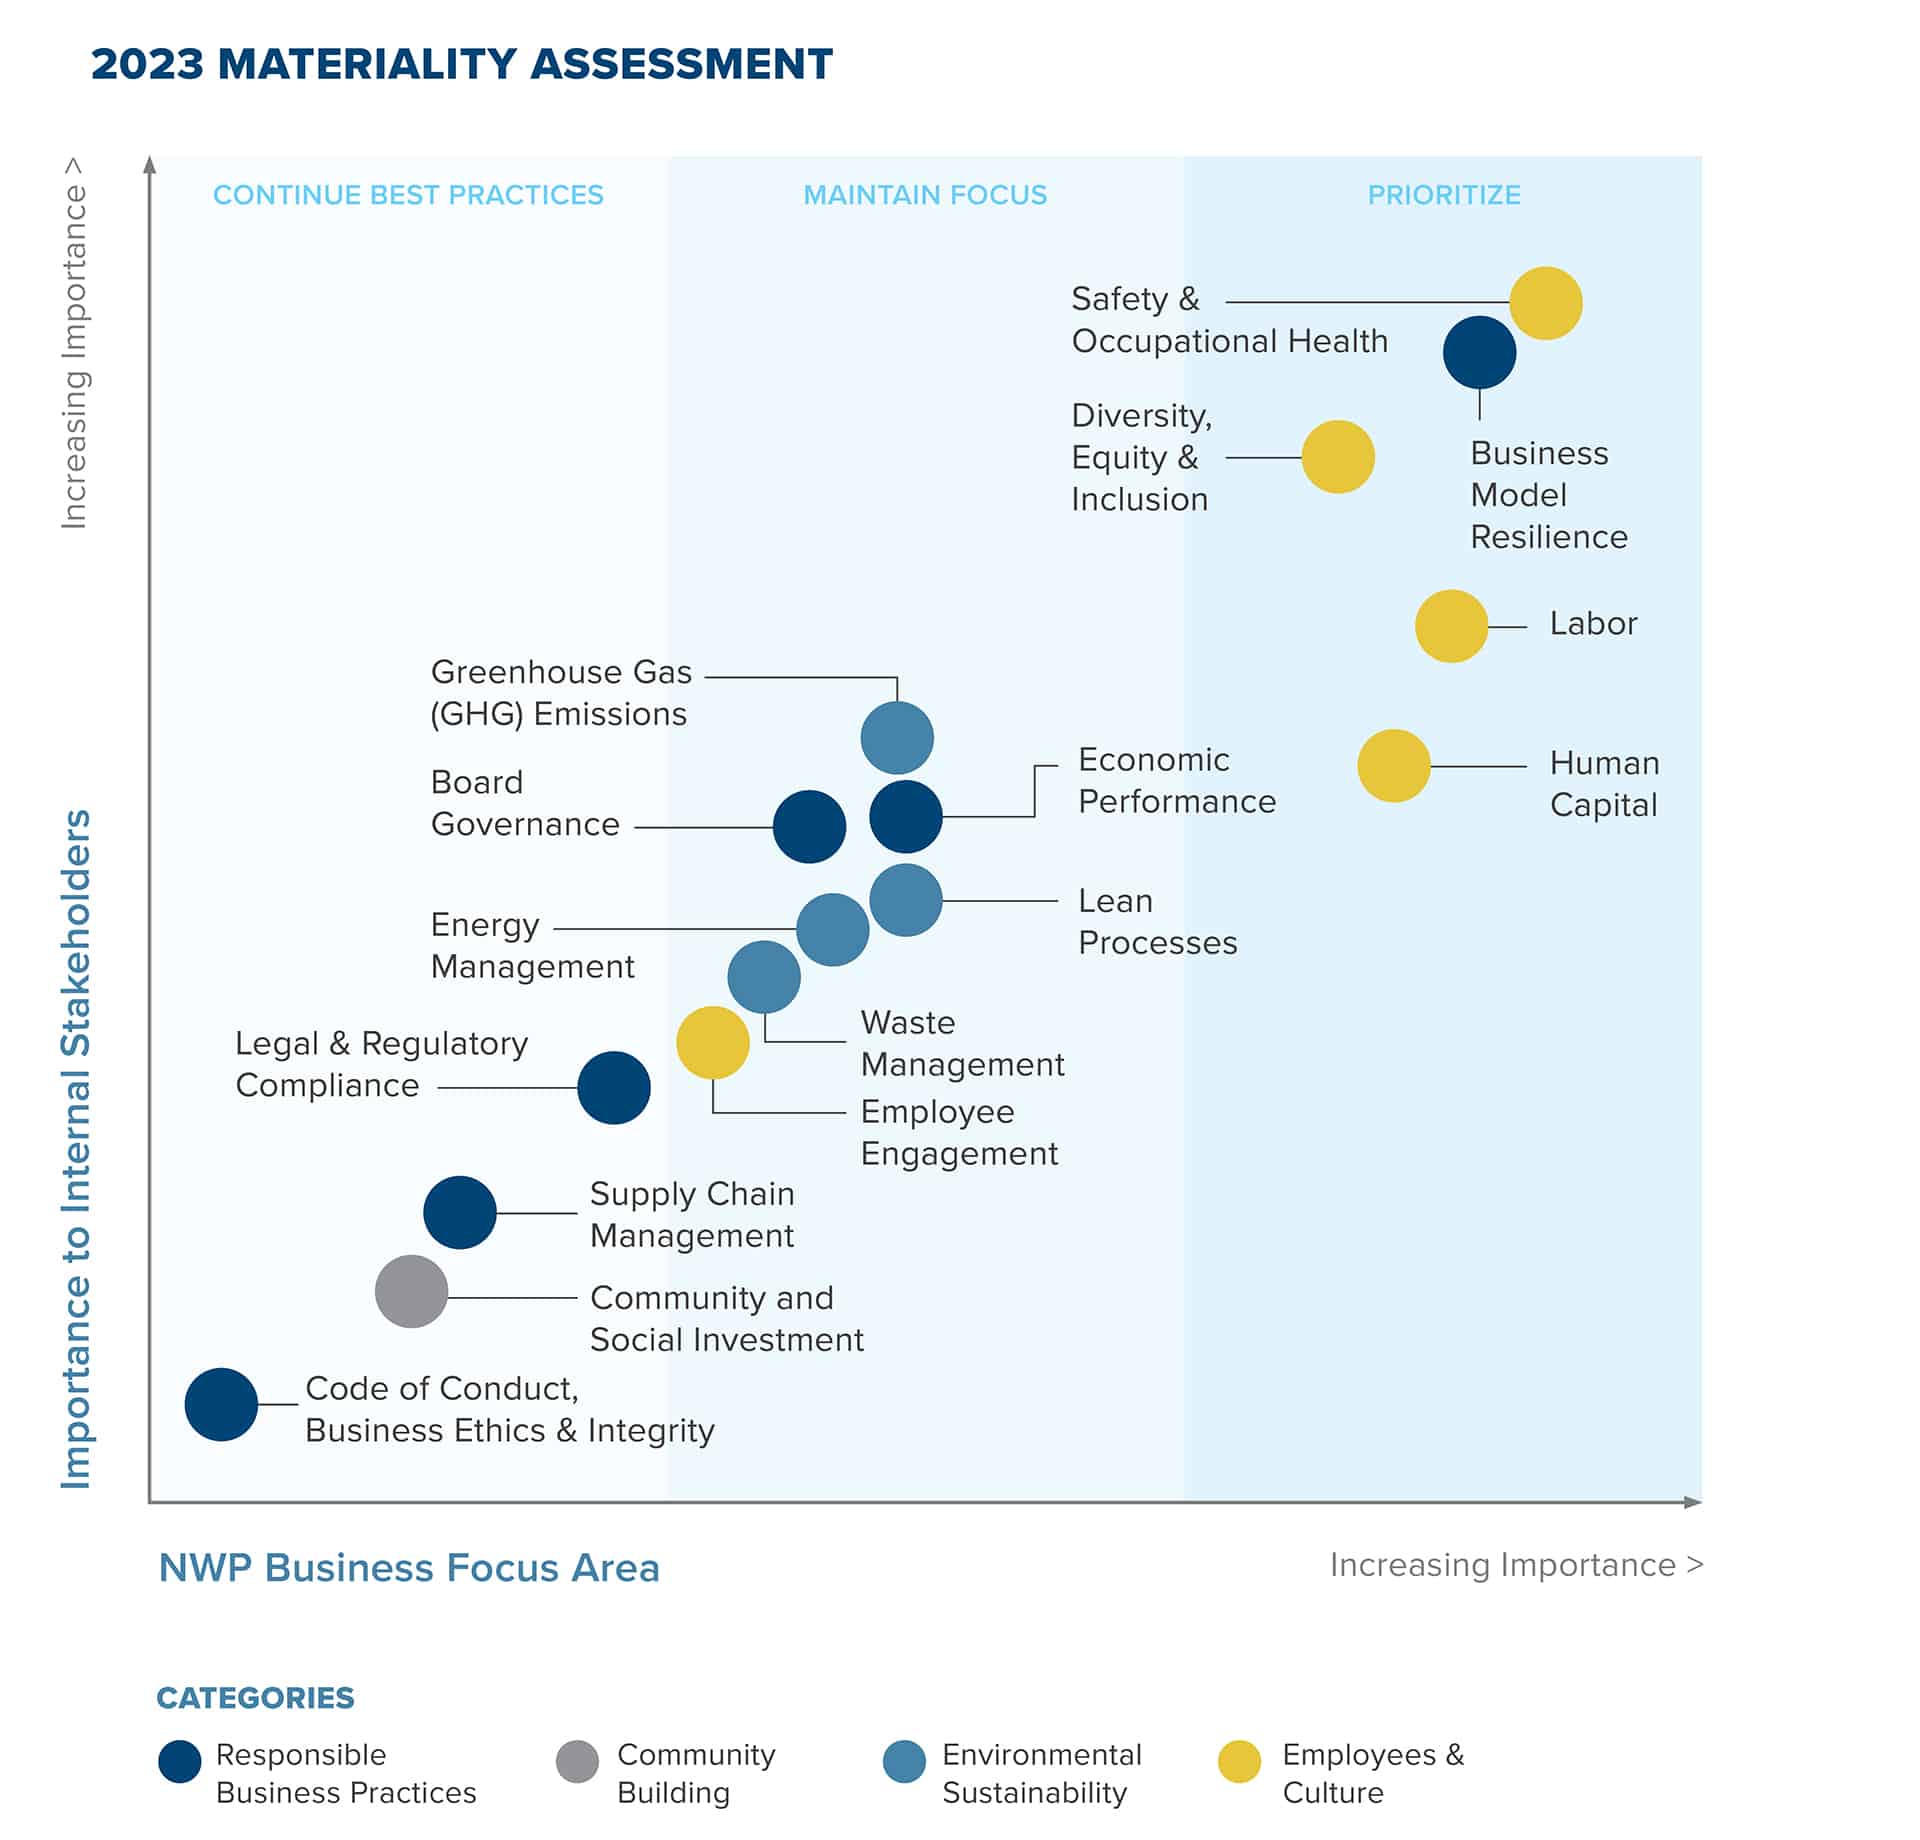 Materiality Assessment 2023